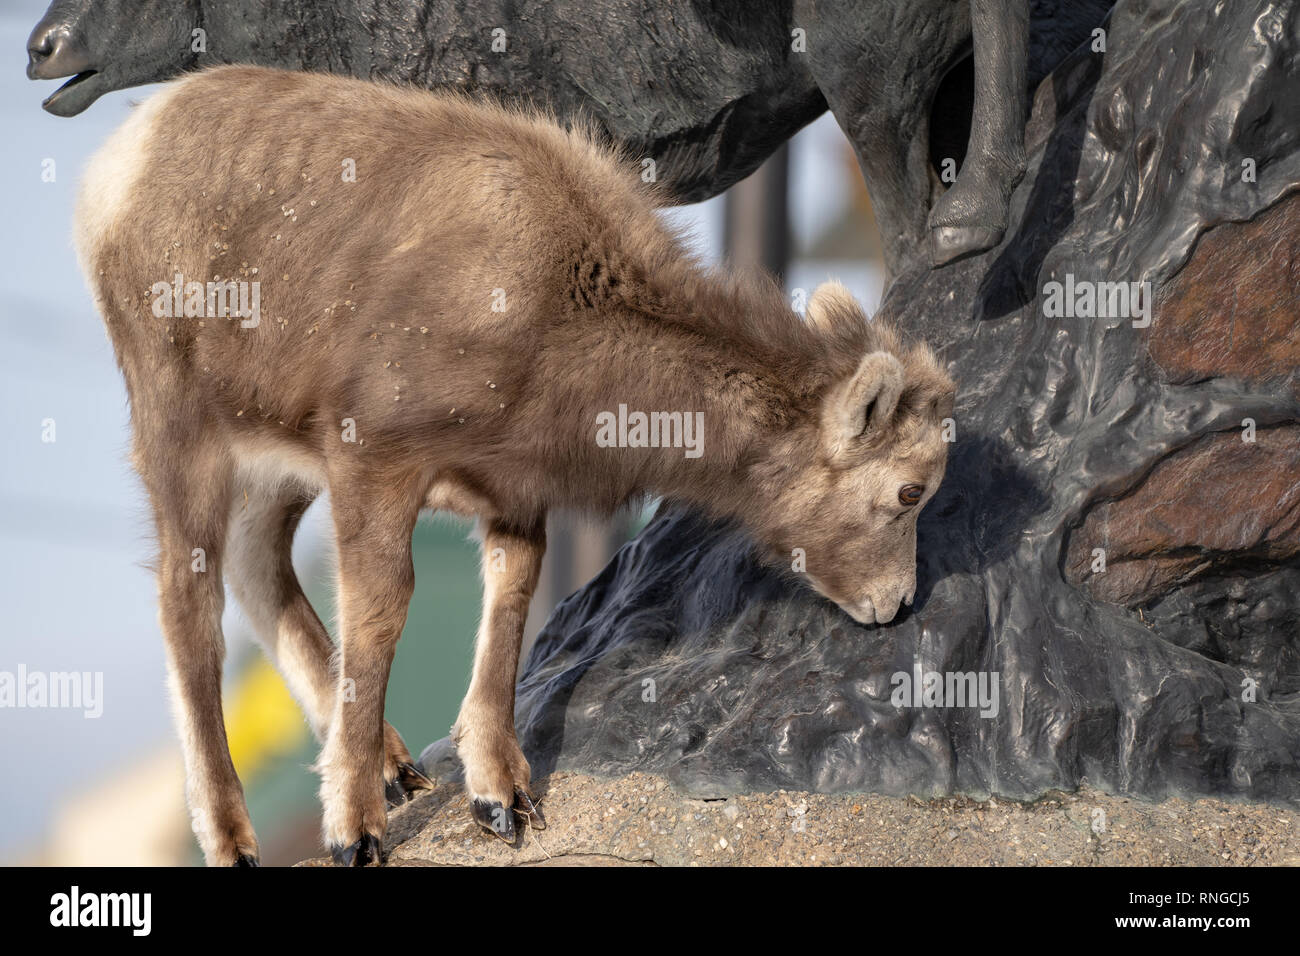 Radium Hot Springs, British Columbia, Canada - Janurary 20, 2019: A confused bighorn sheep baby ewe stands on top of a statue of Bighorn sheep, confus Stock Photo